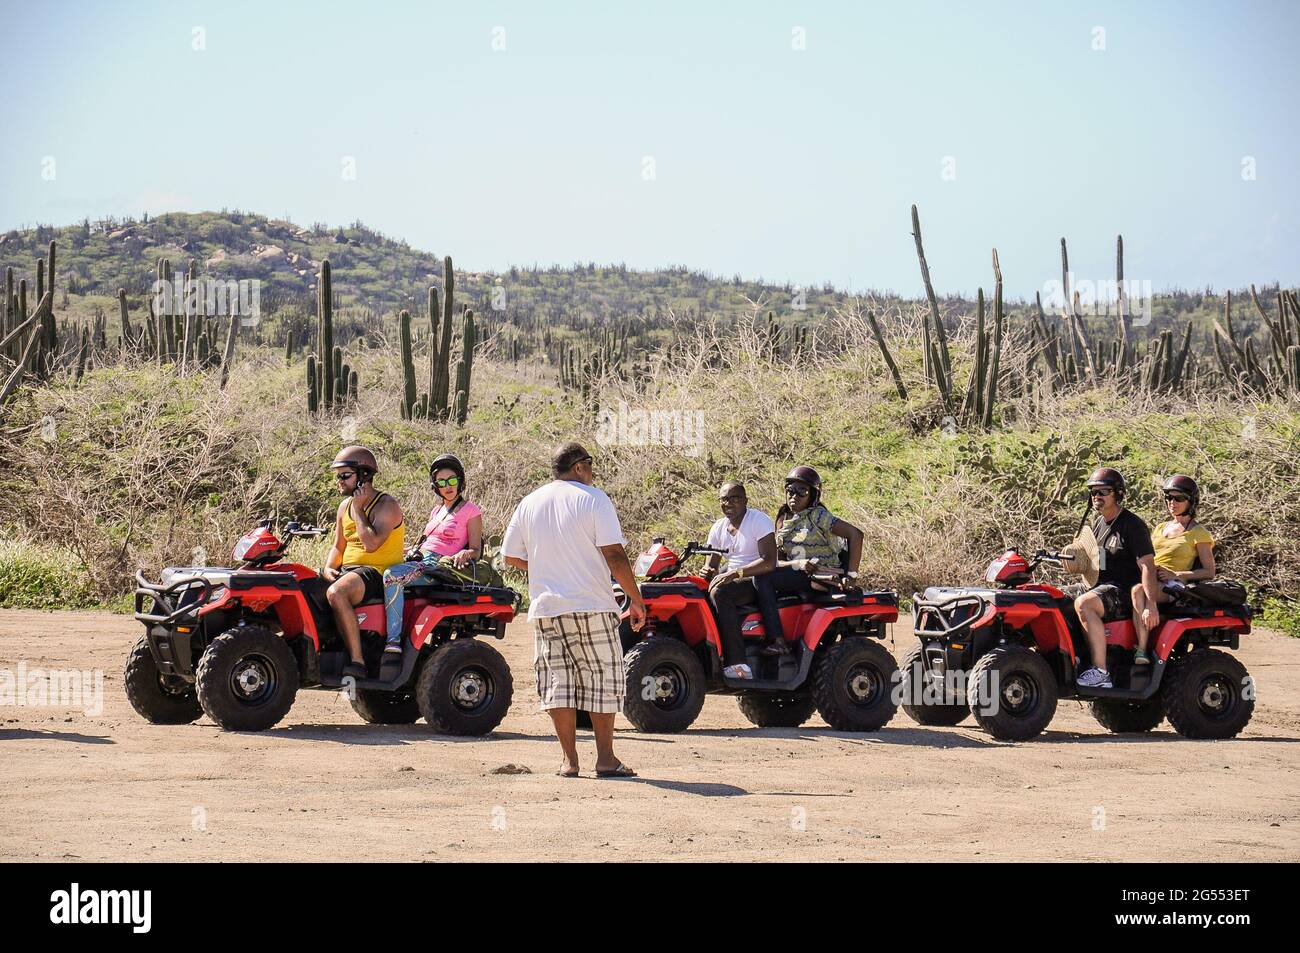 Group of people having a guided tour by some quads with some cacti in the background in Aruba Stock Photo